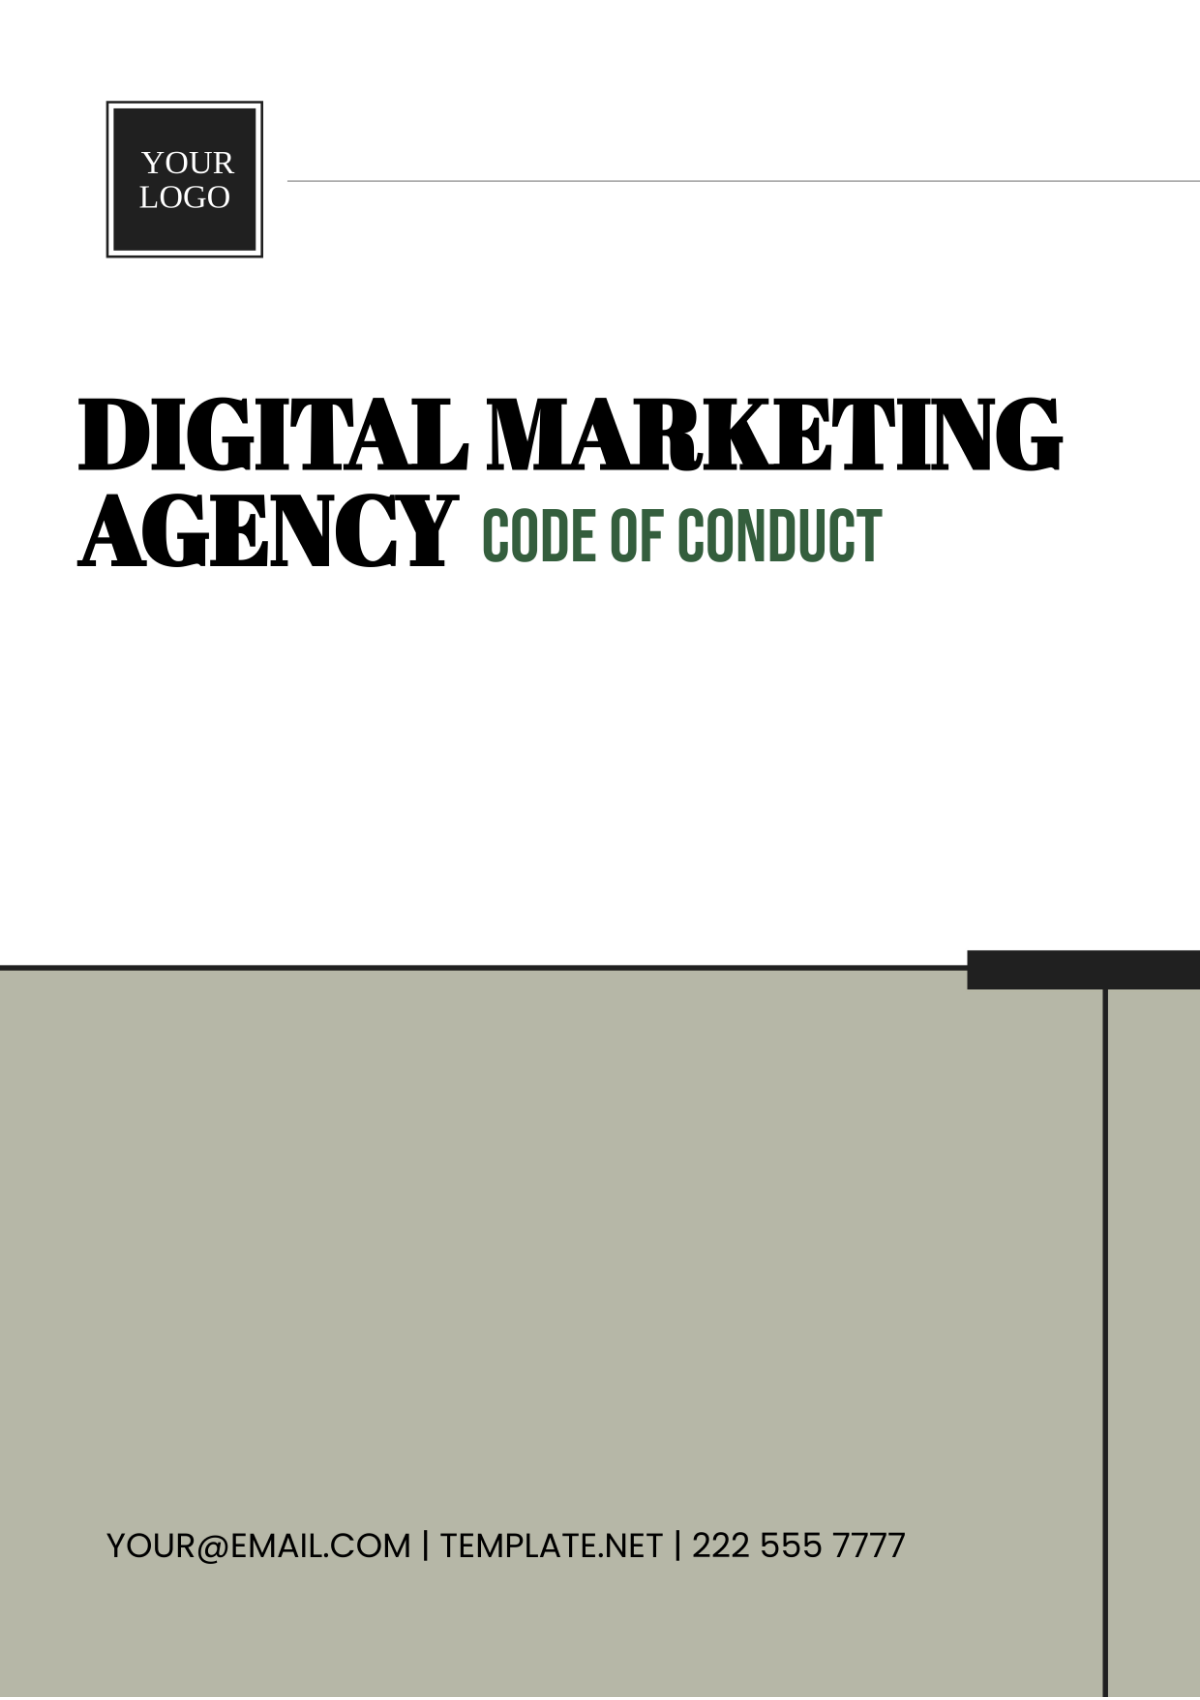 Free Digital Marketing Agency Code of Conduct Template